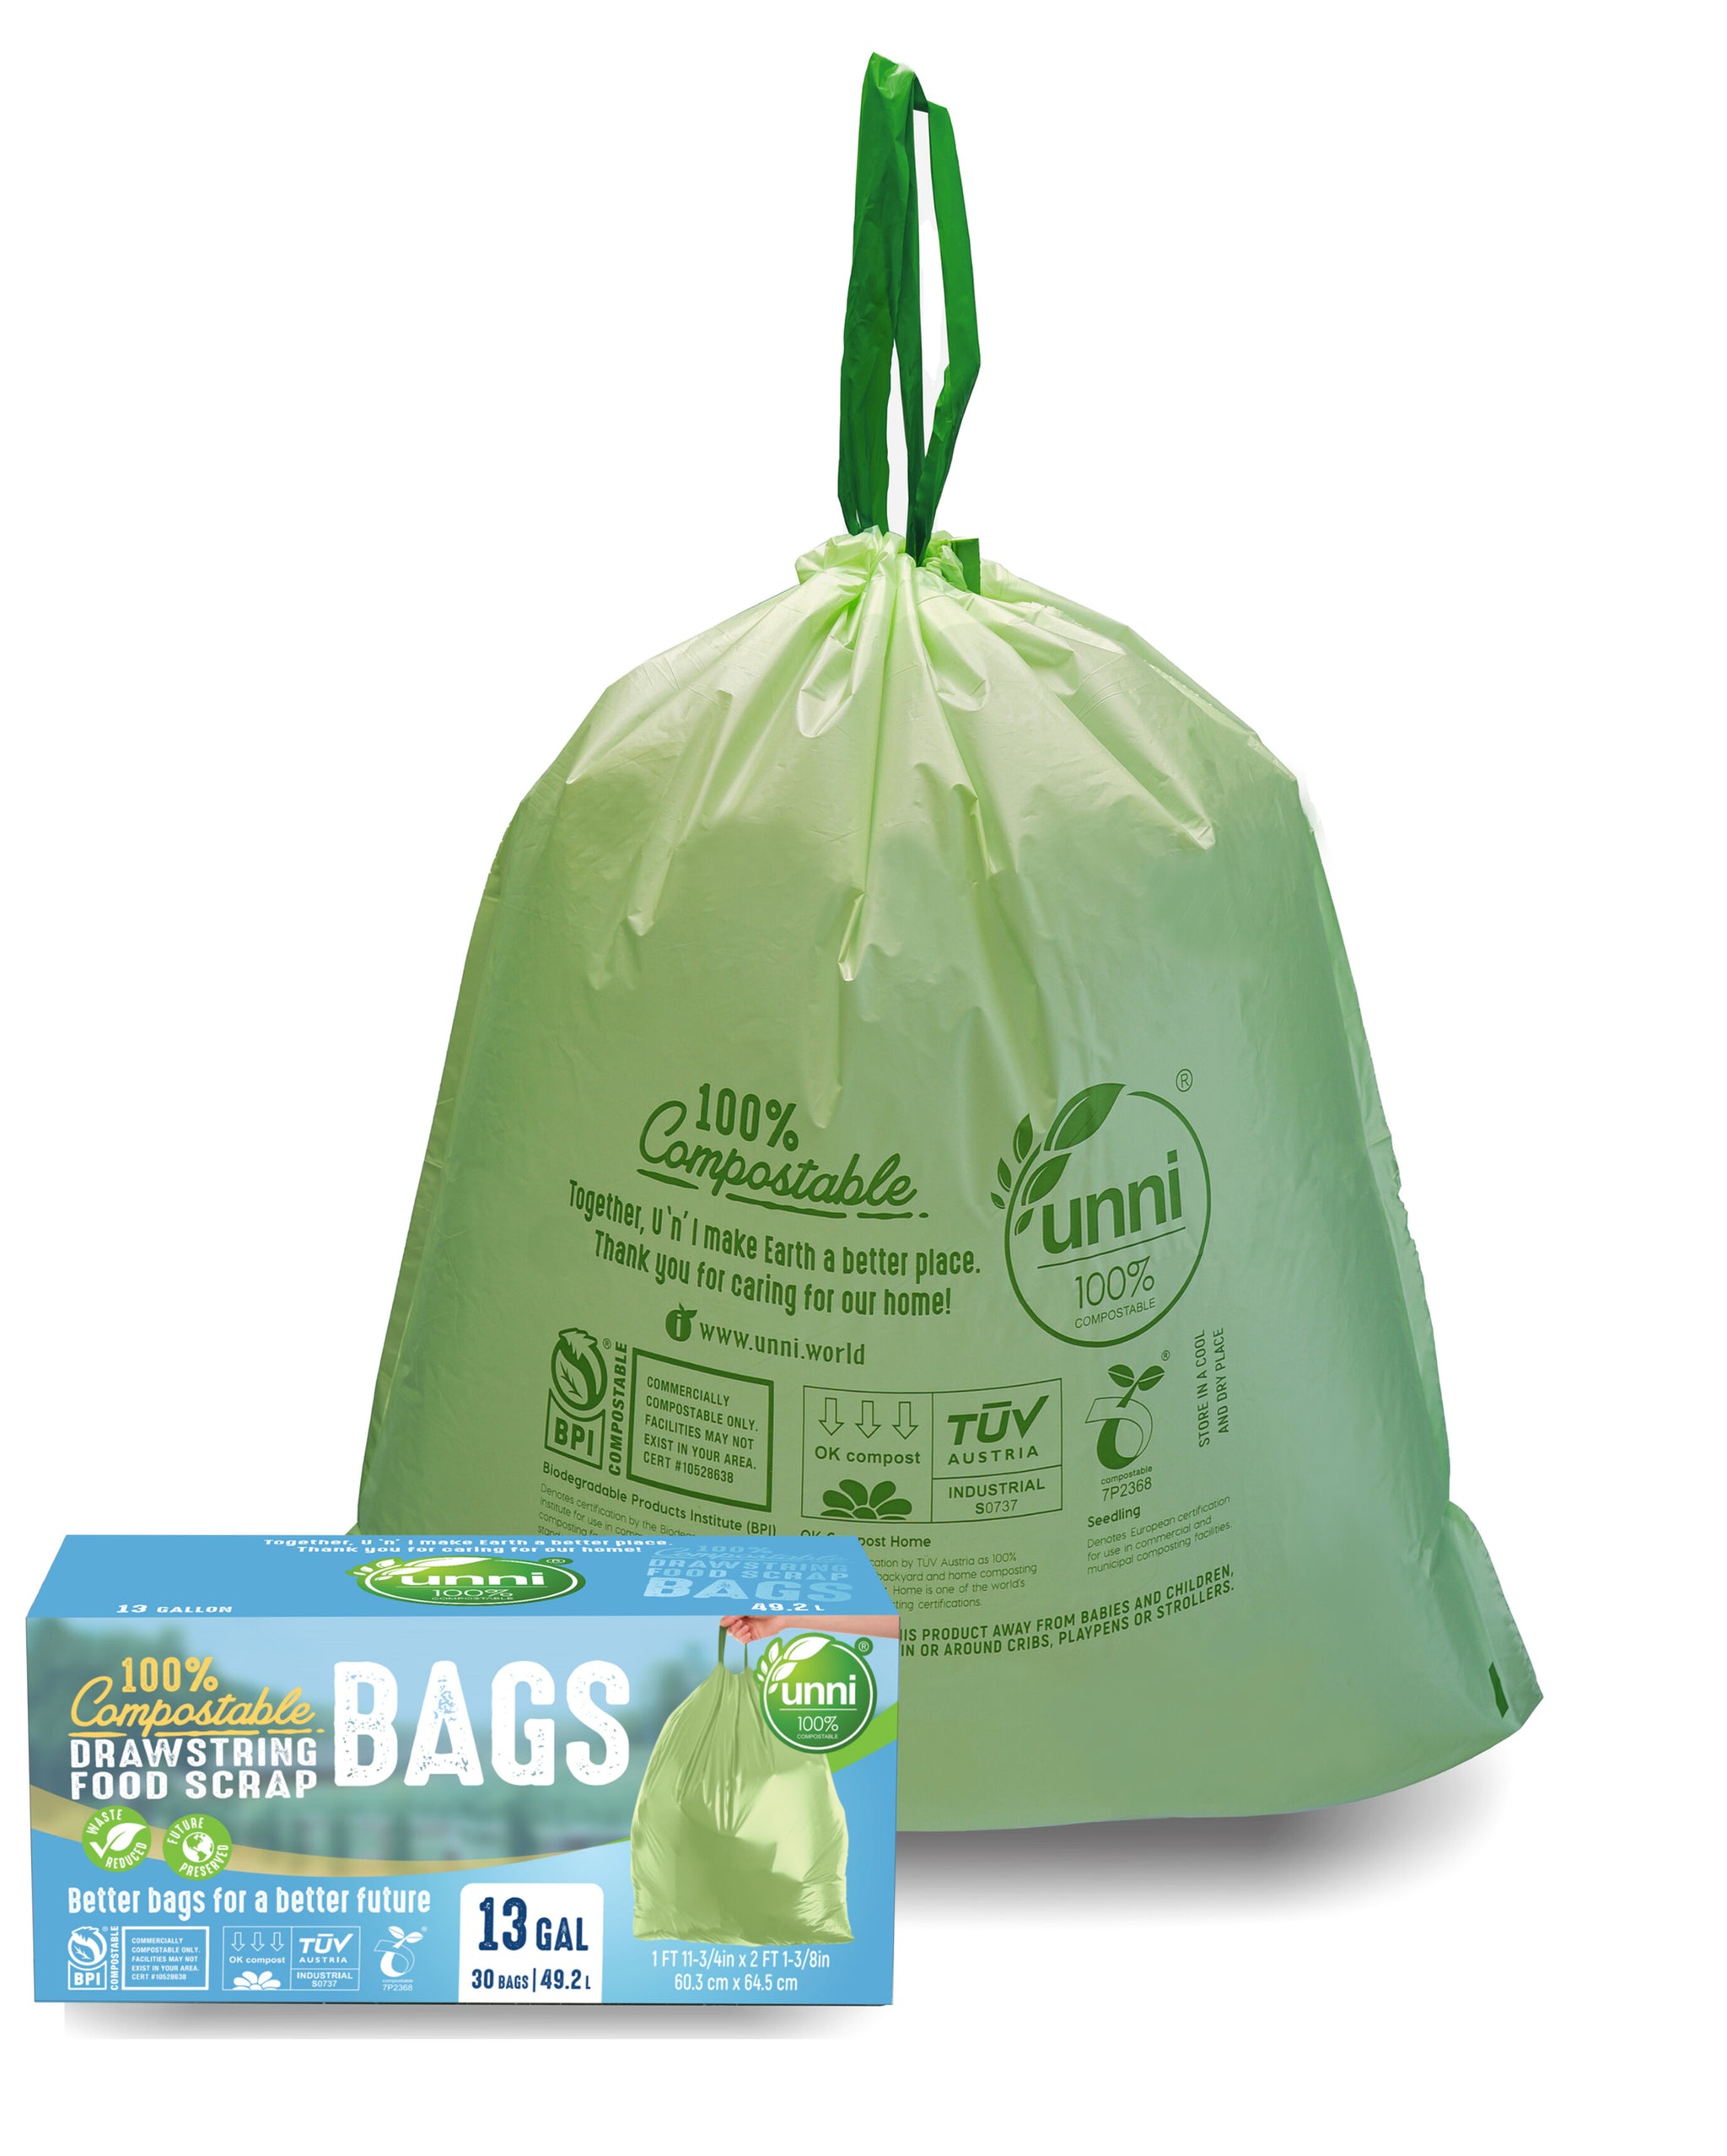 MyEcoWorld 13-gallon Compostable Food Waste Bag, 72-count